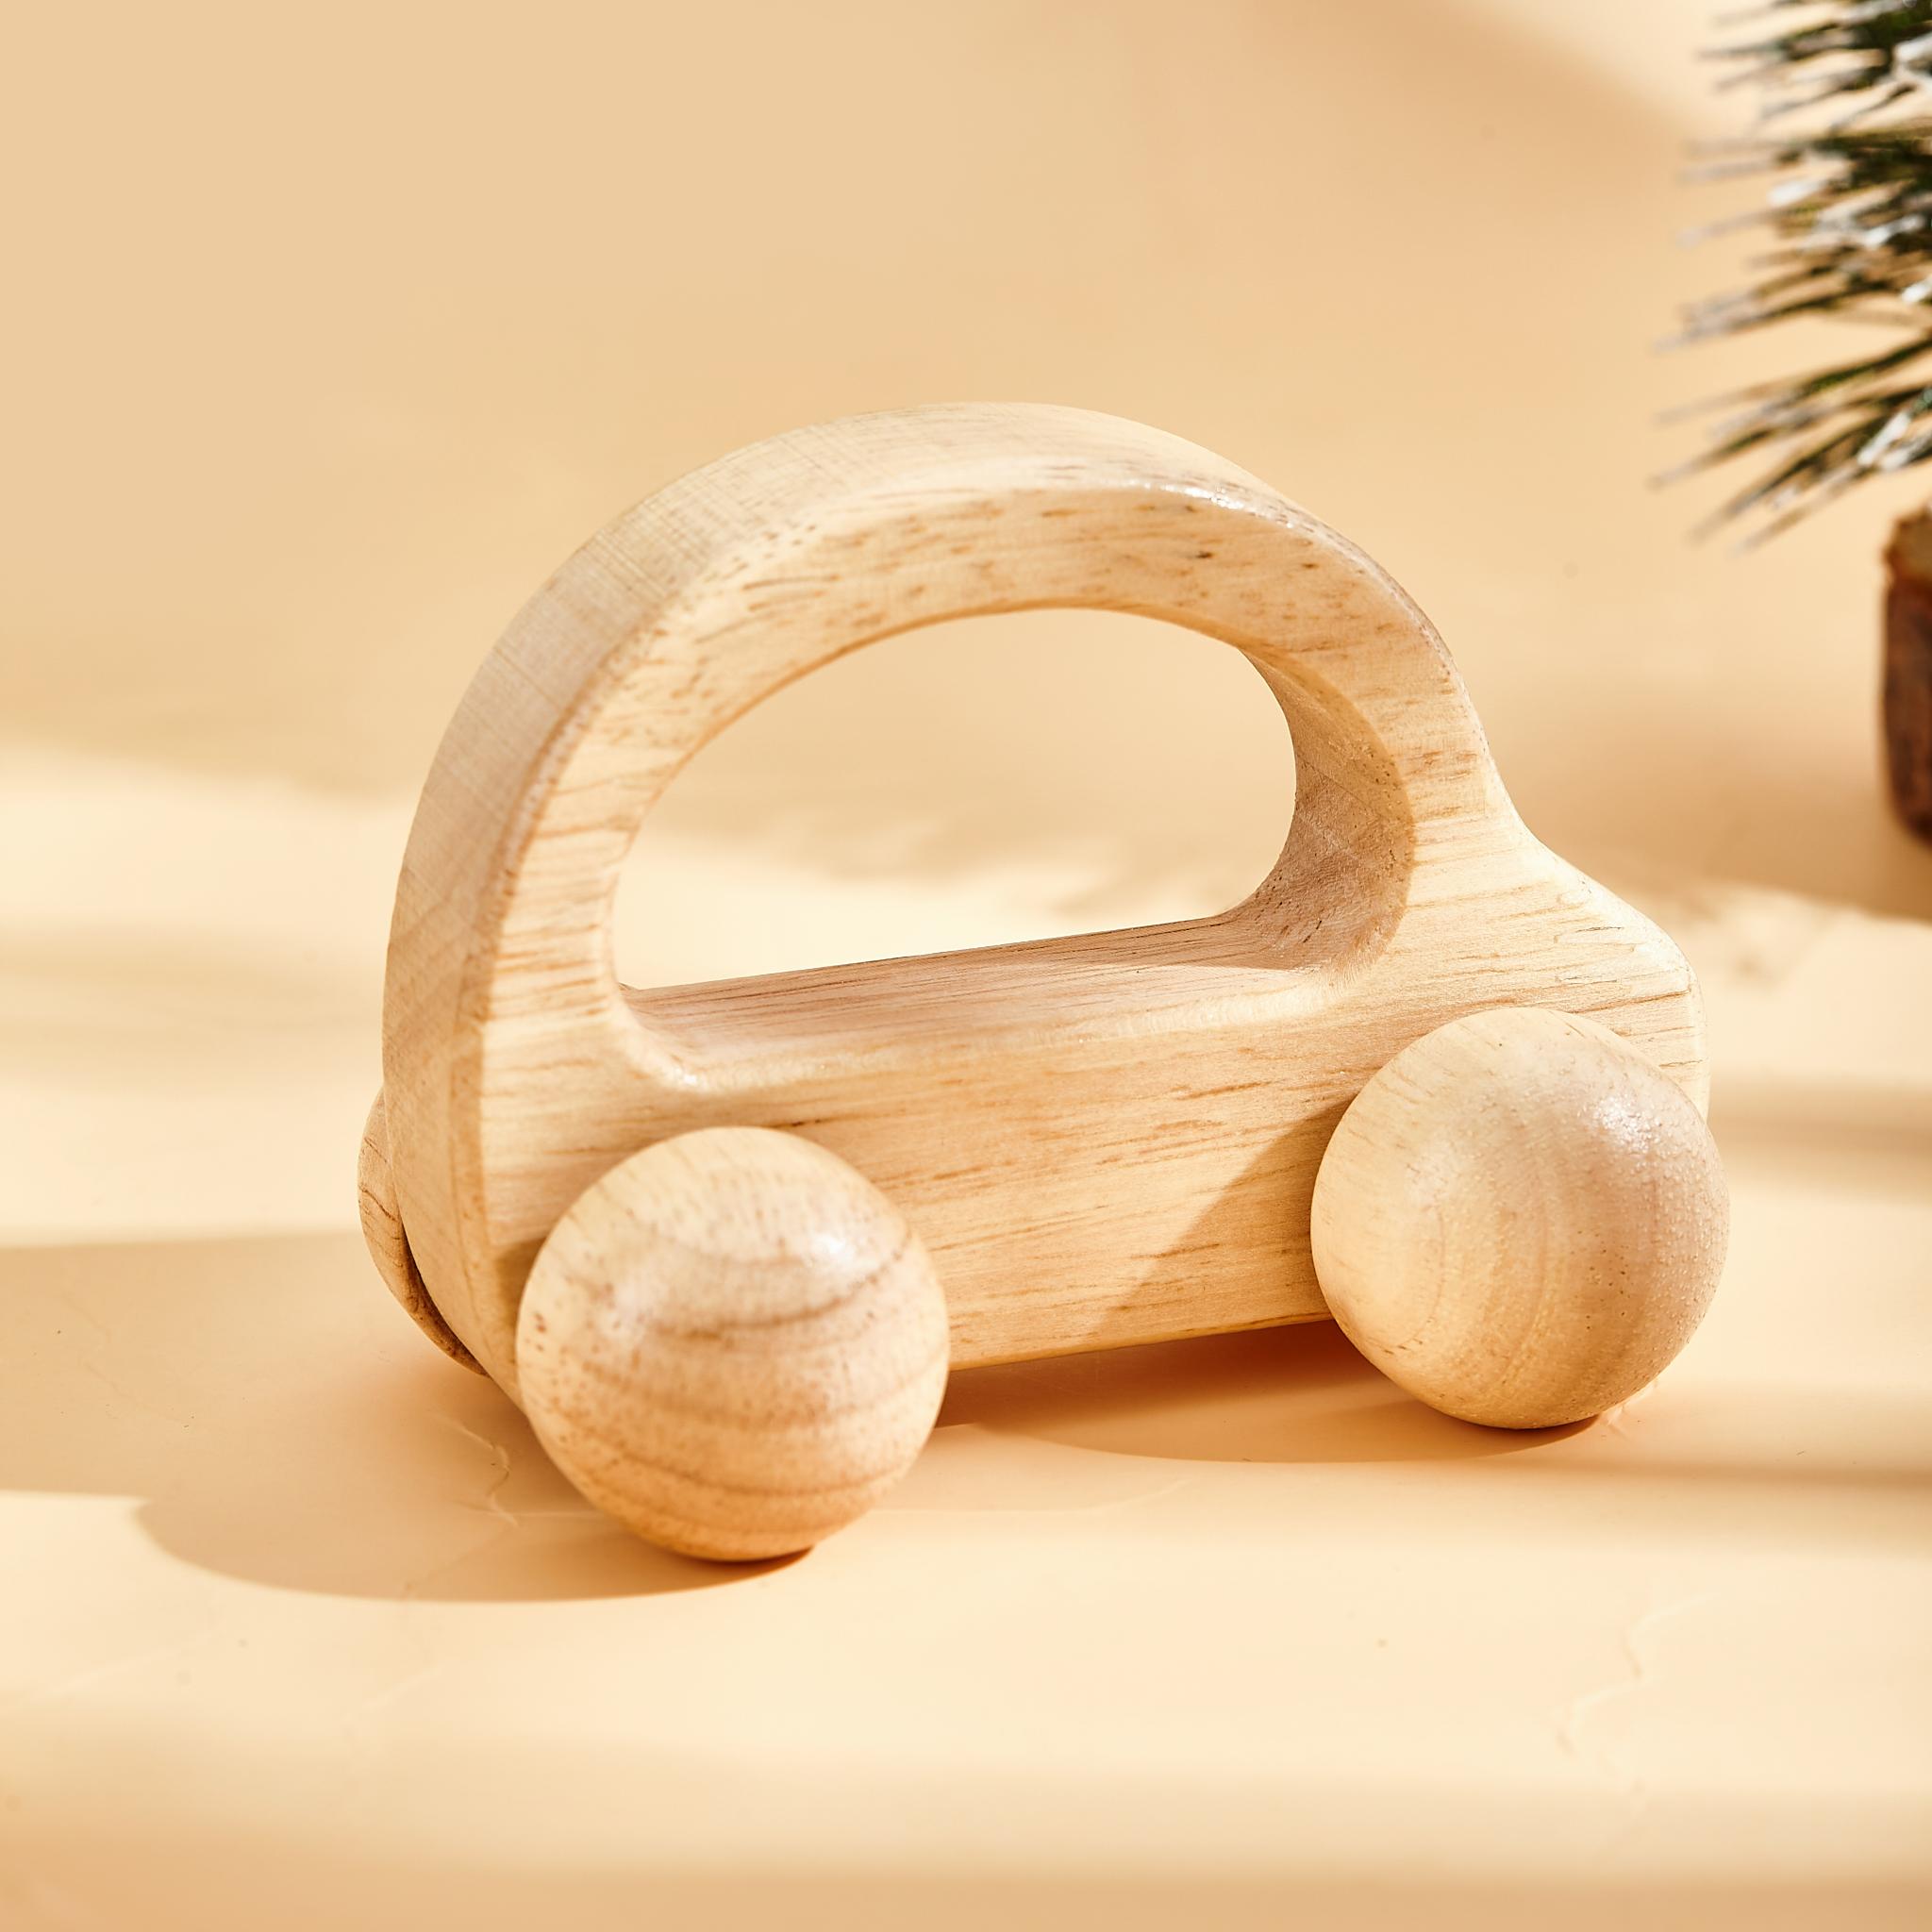 Wooden toy car with handle